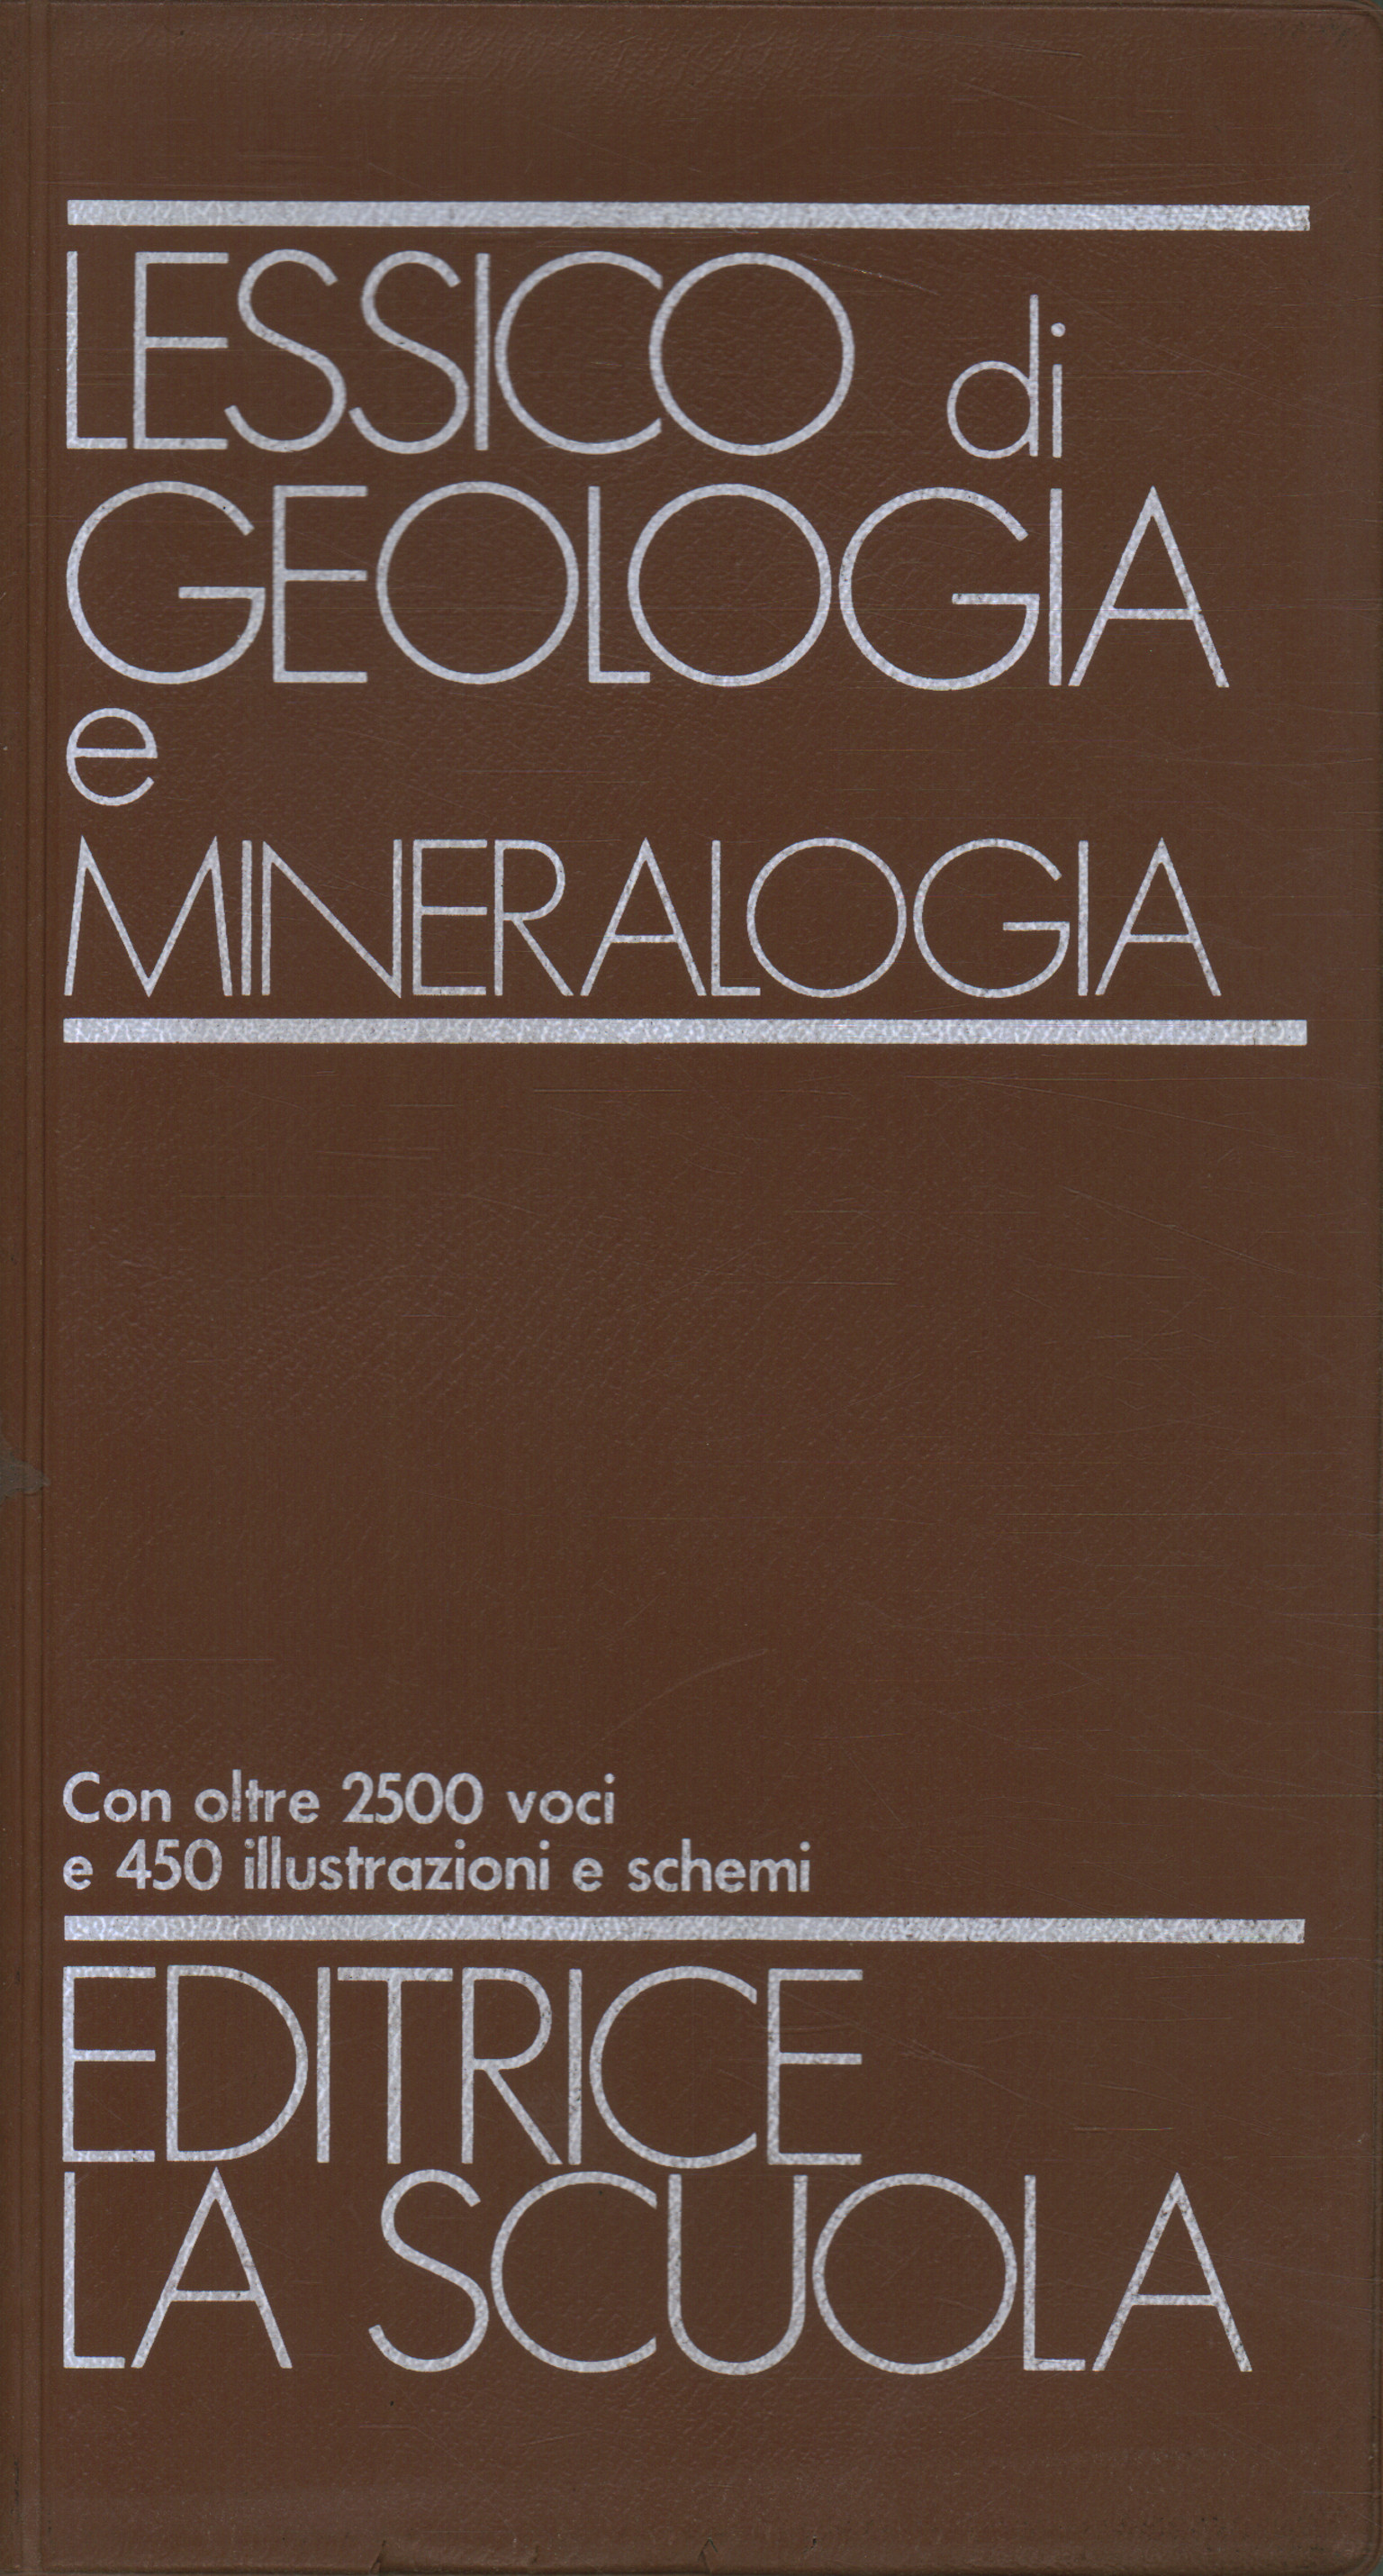 Lexicon of geology and mineralogy